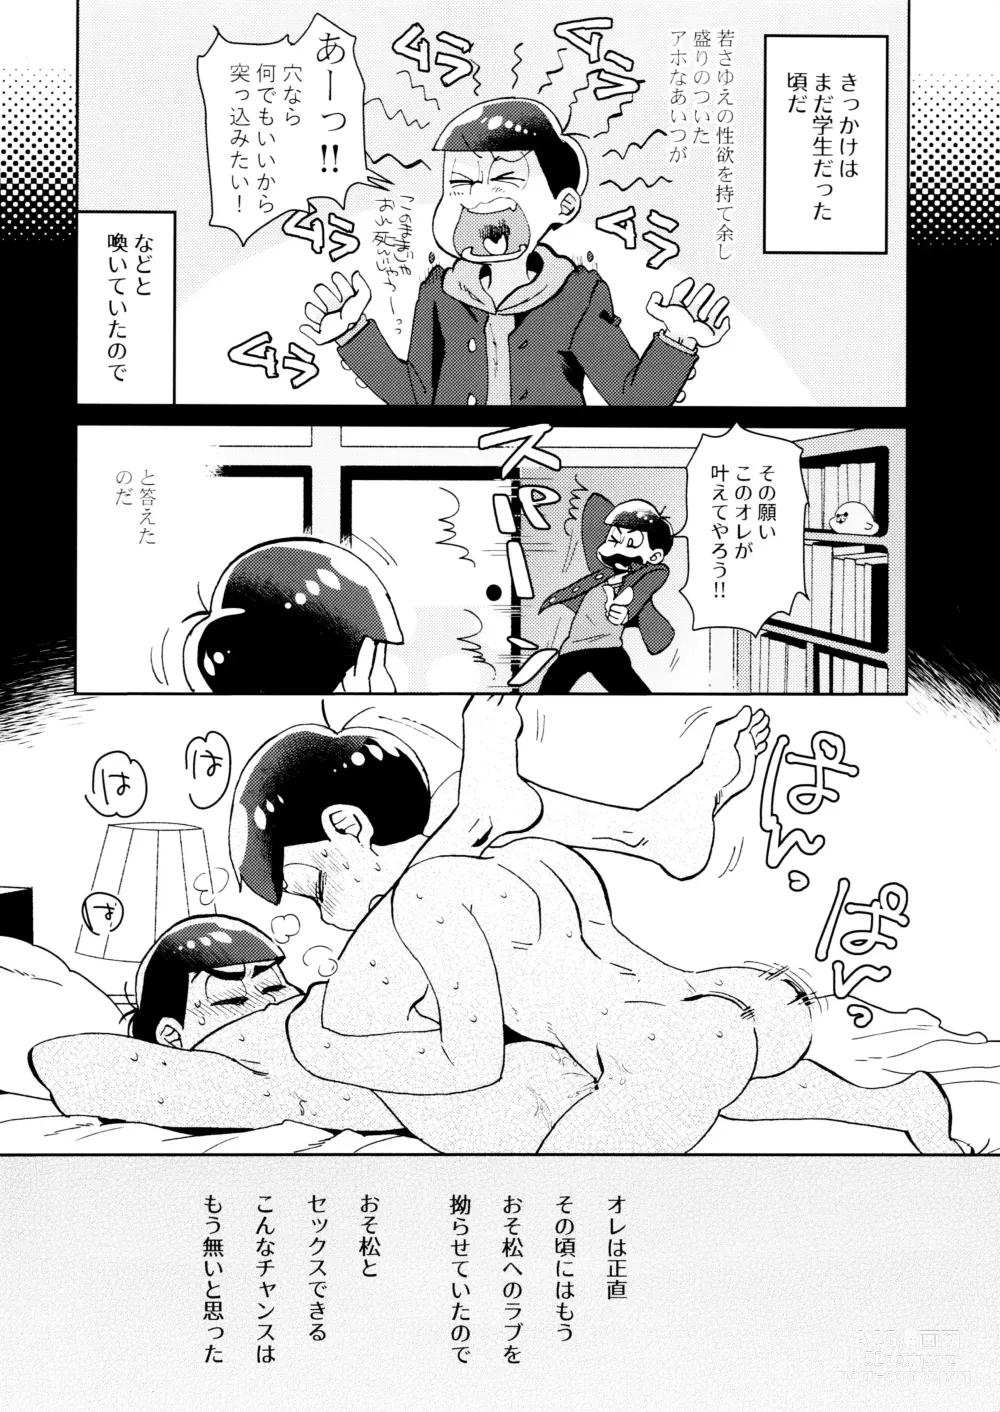 Page 6 of doujinshi Easy and Blue